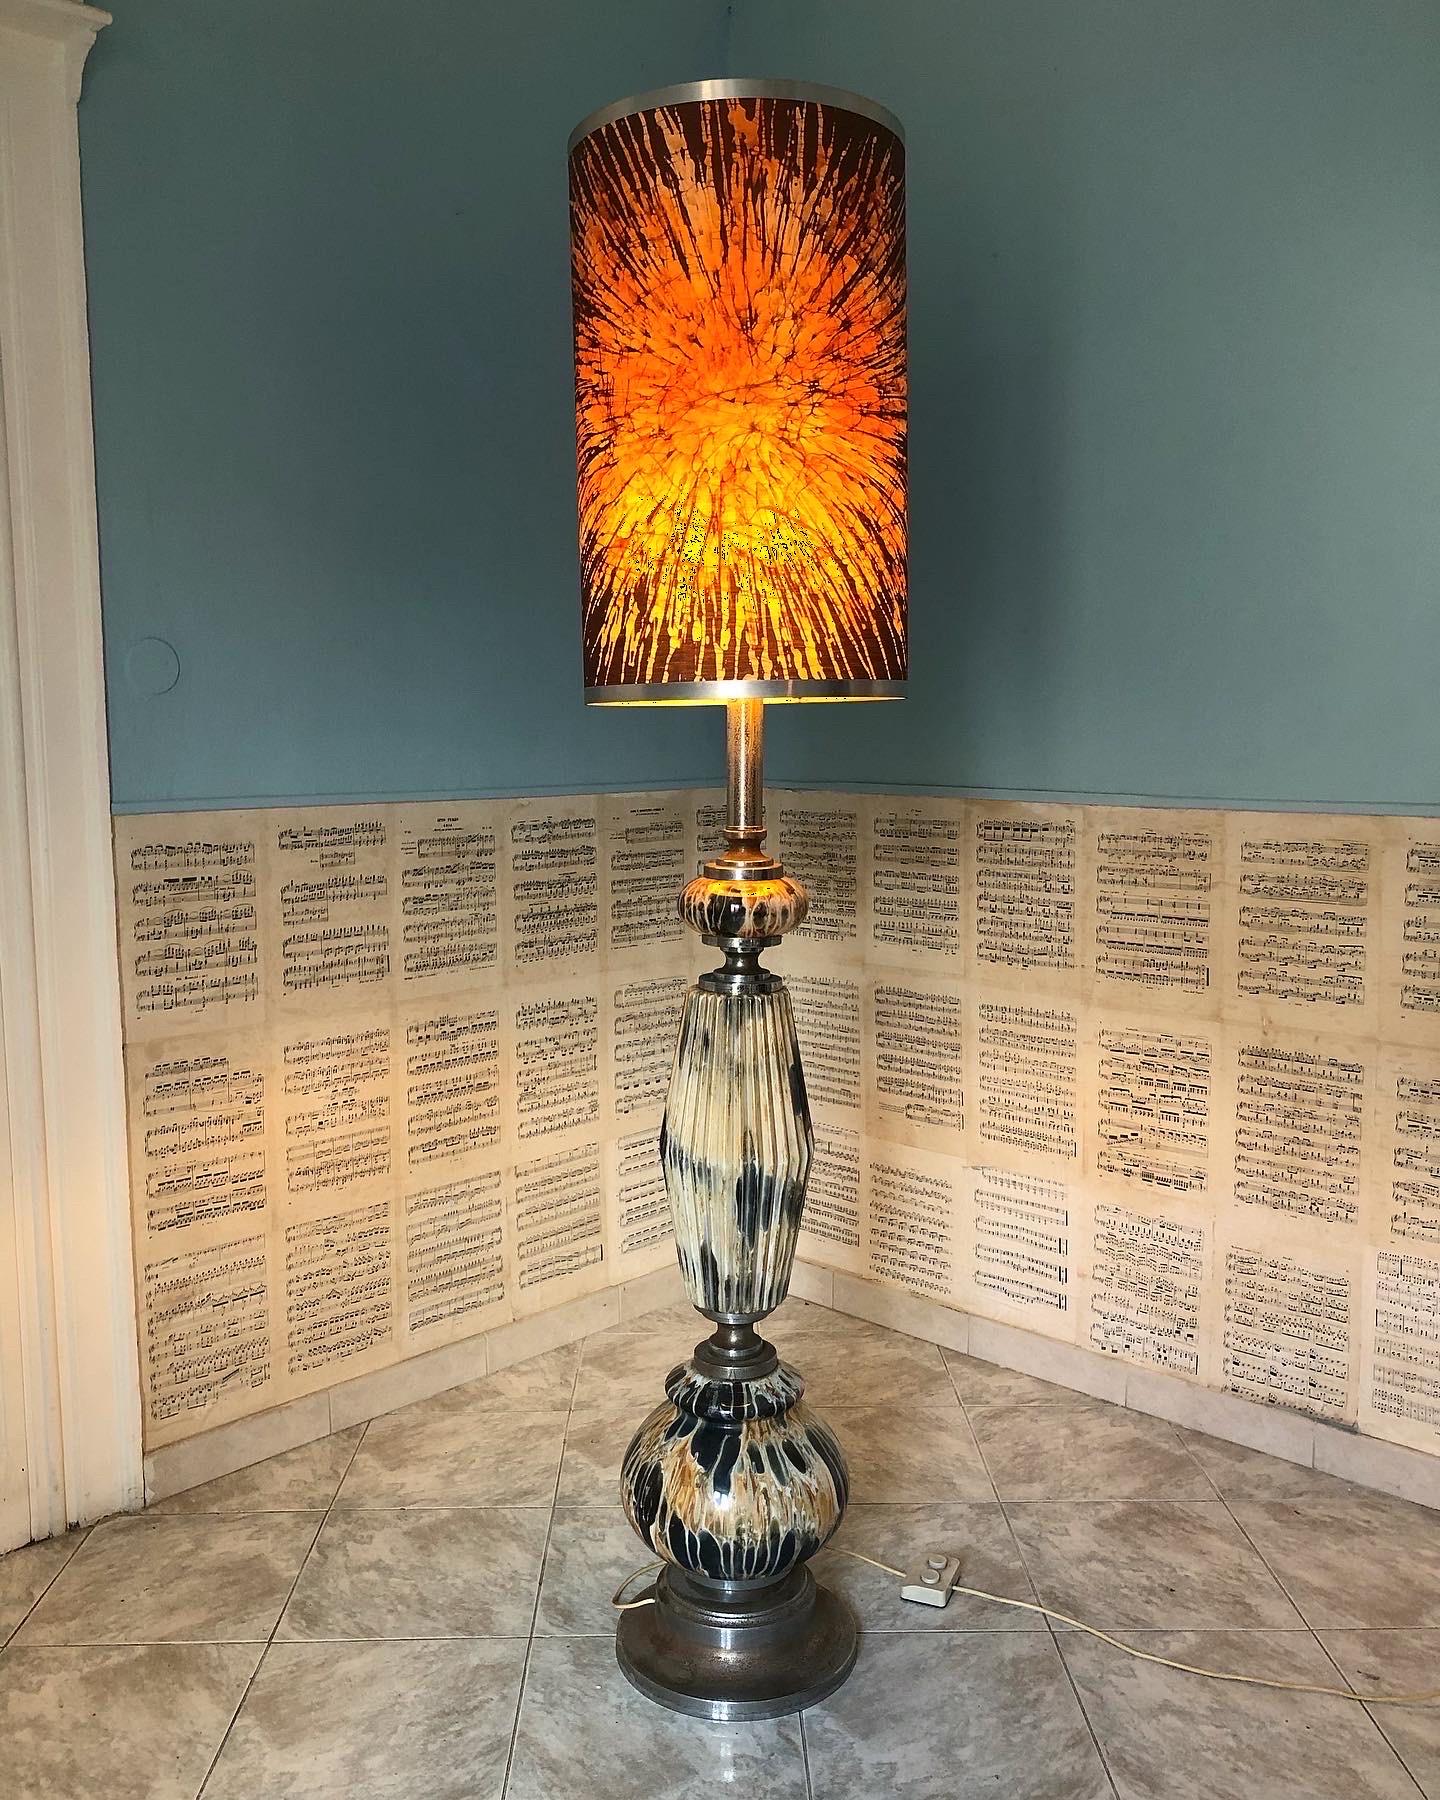 Impressive Mid-Century Modern psychedelic batik patterned glass floor light. 
The light has lightsource in the lampshade as well as in the base.

The base is handcrafted, painted glass.
The lampshade has a beautiful colored batik